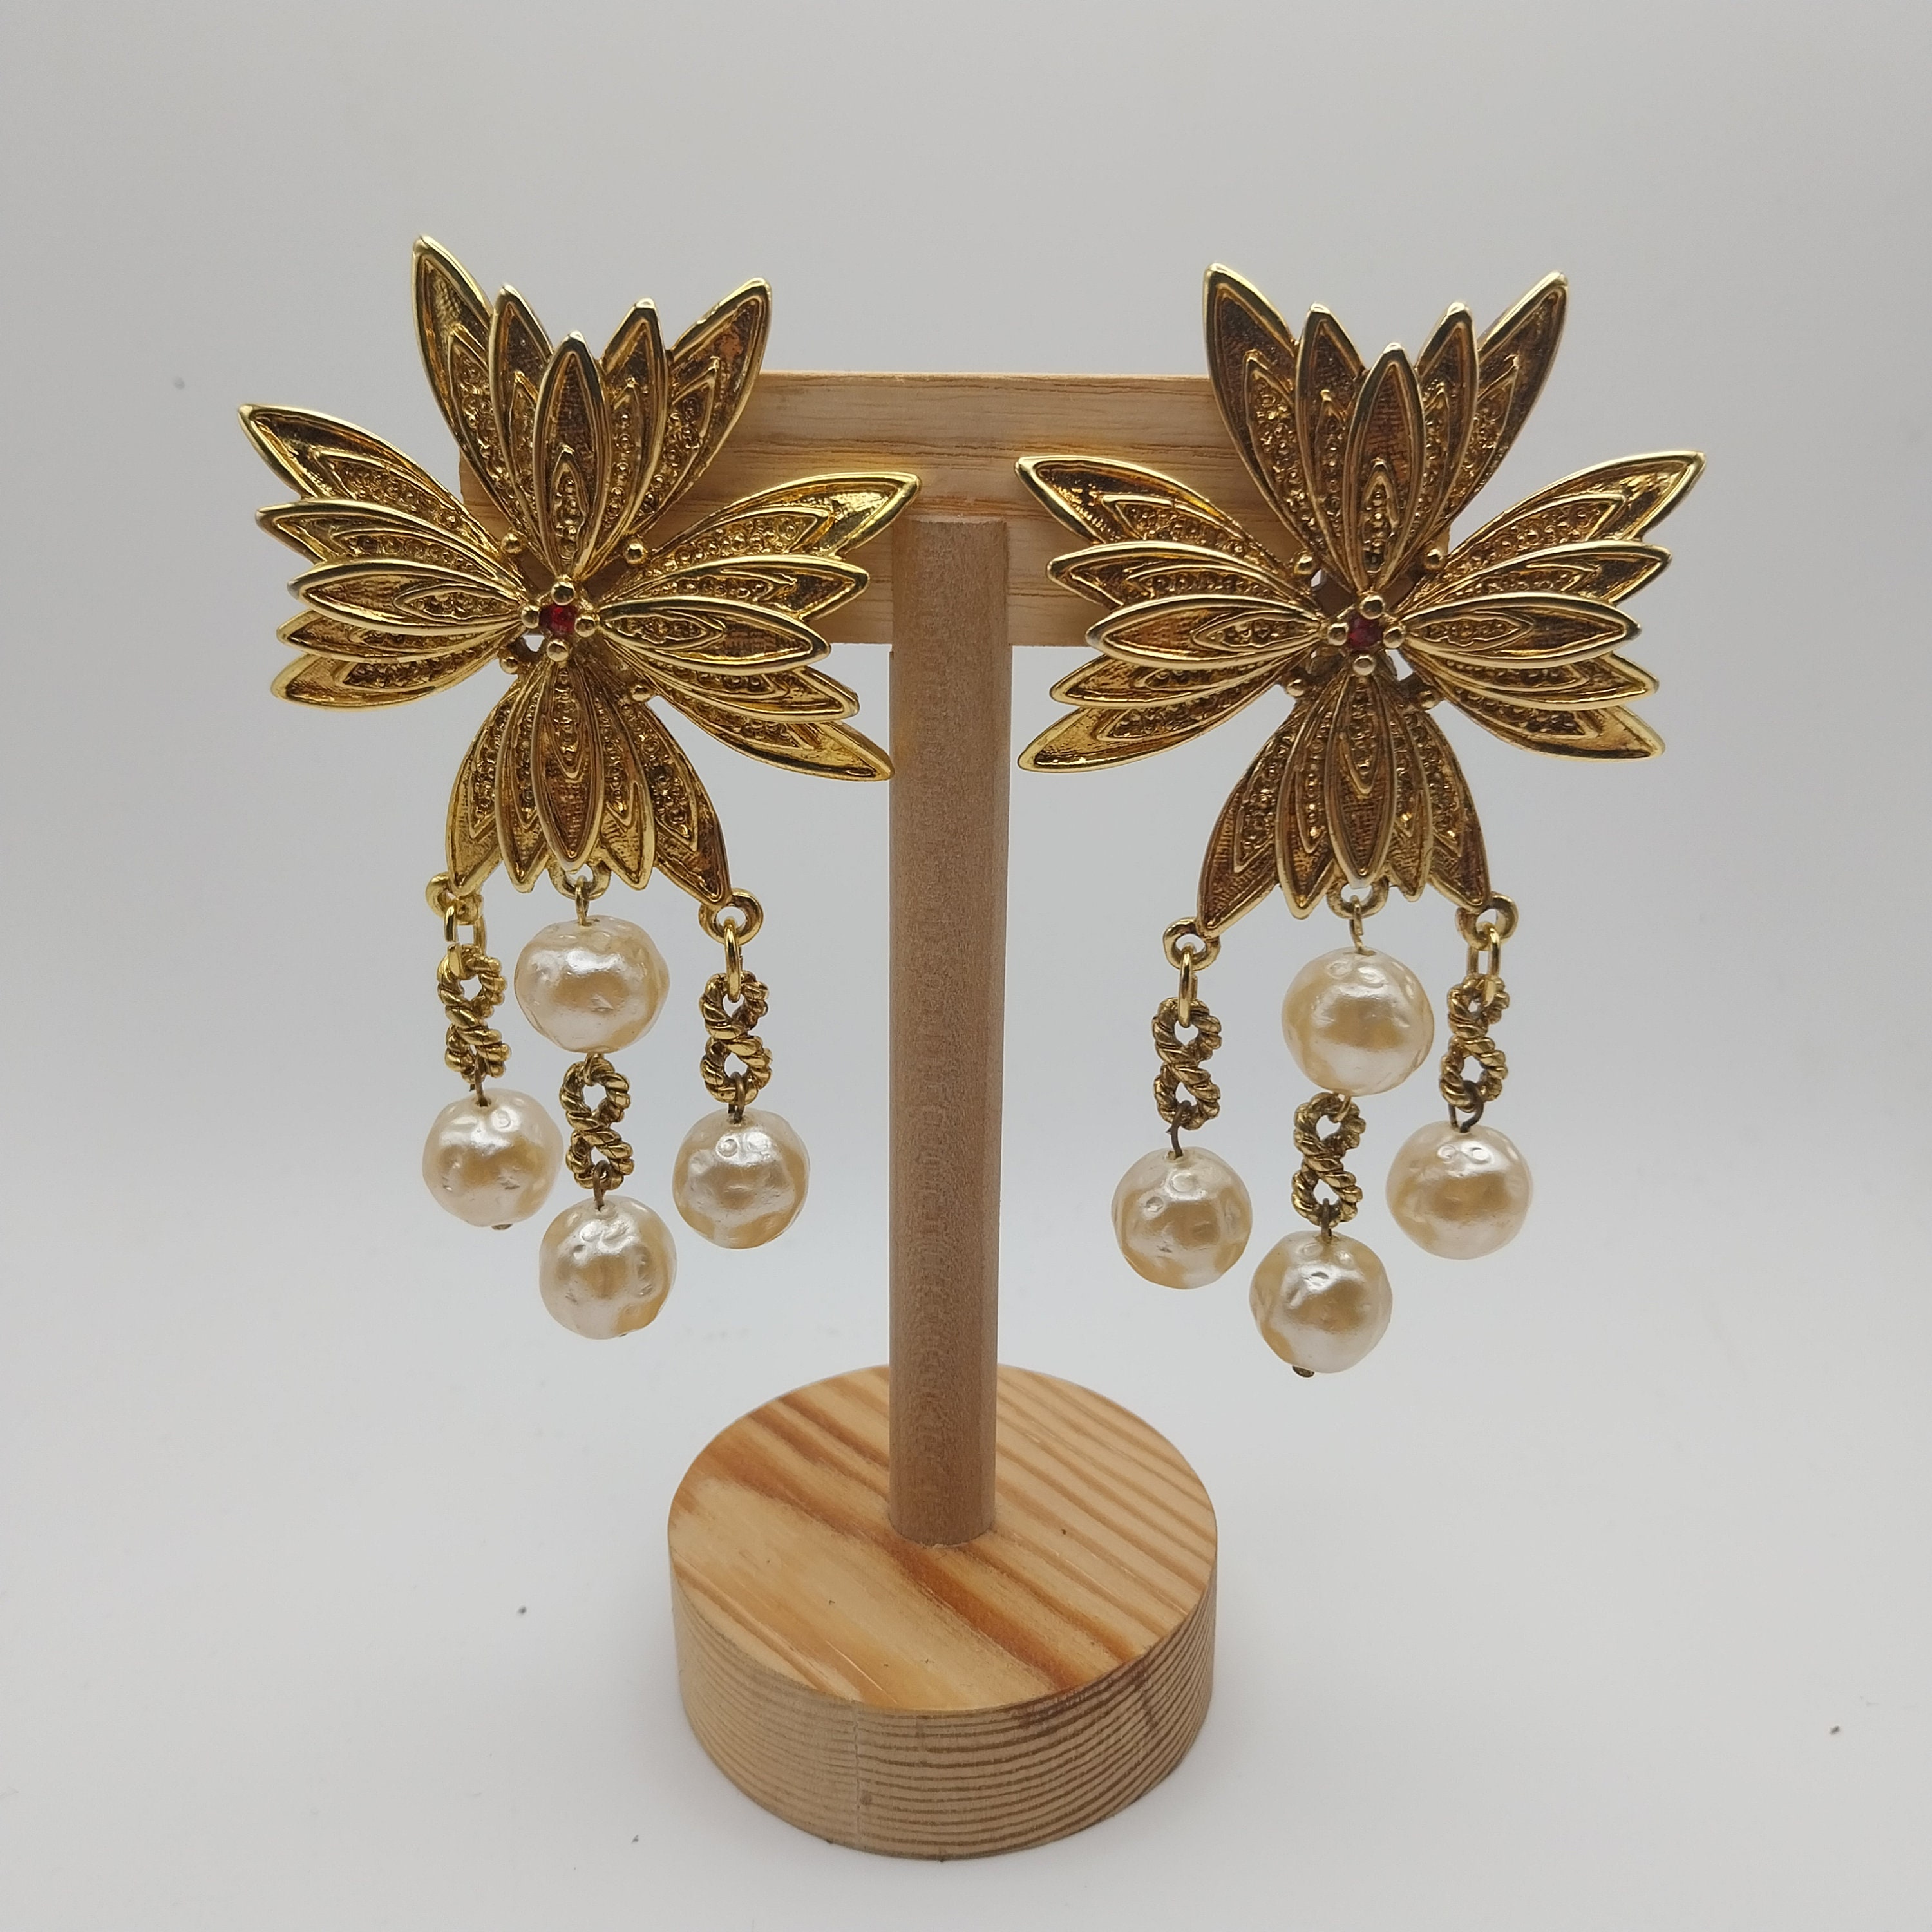 Louis Vuitton Upcycled Clip-on Earrings Gold - $65 - From Katheline